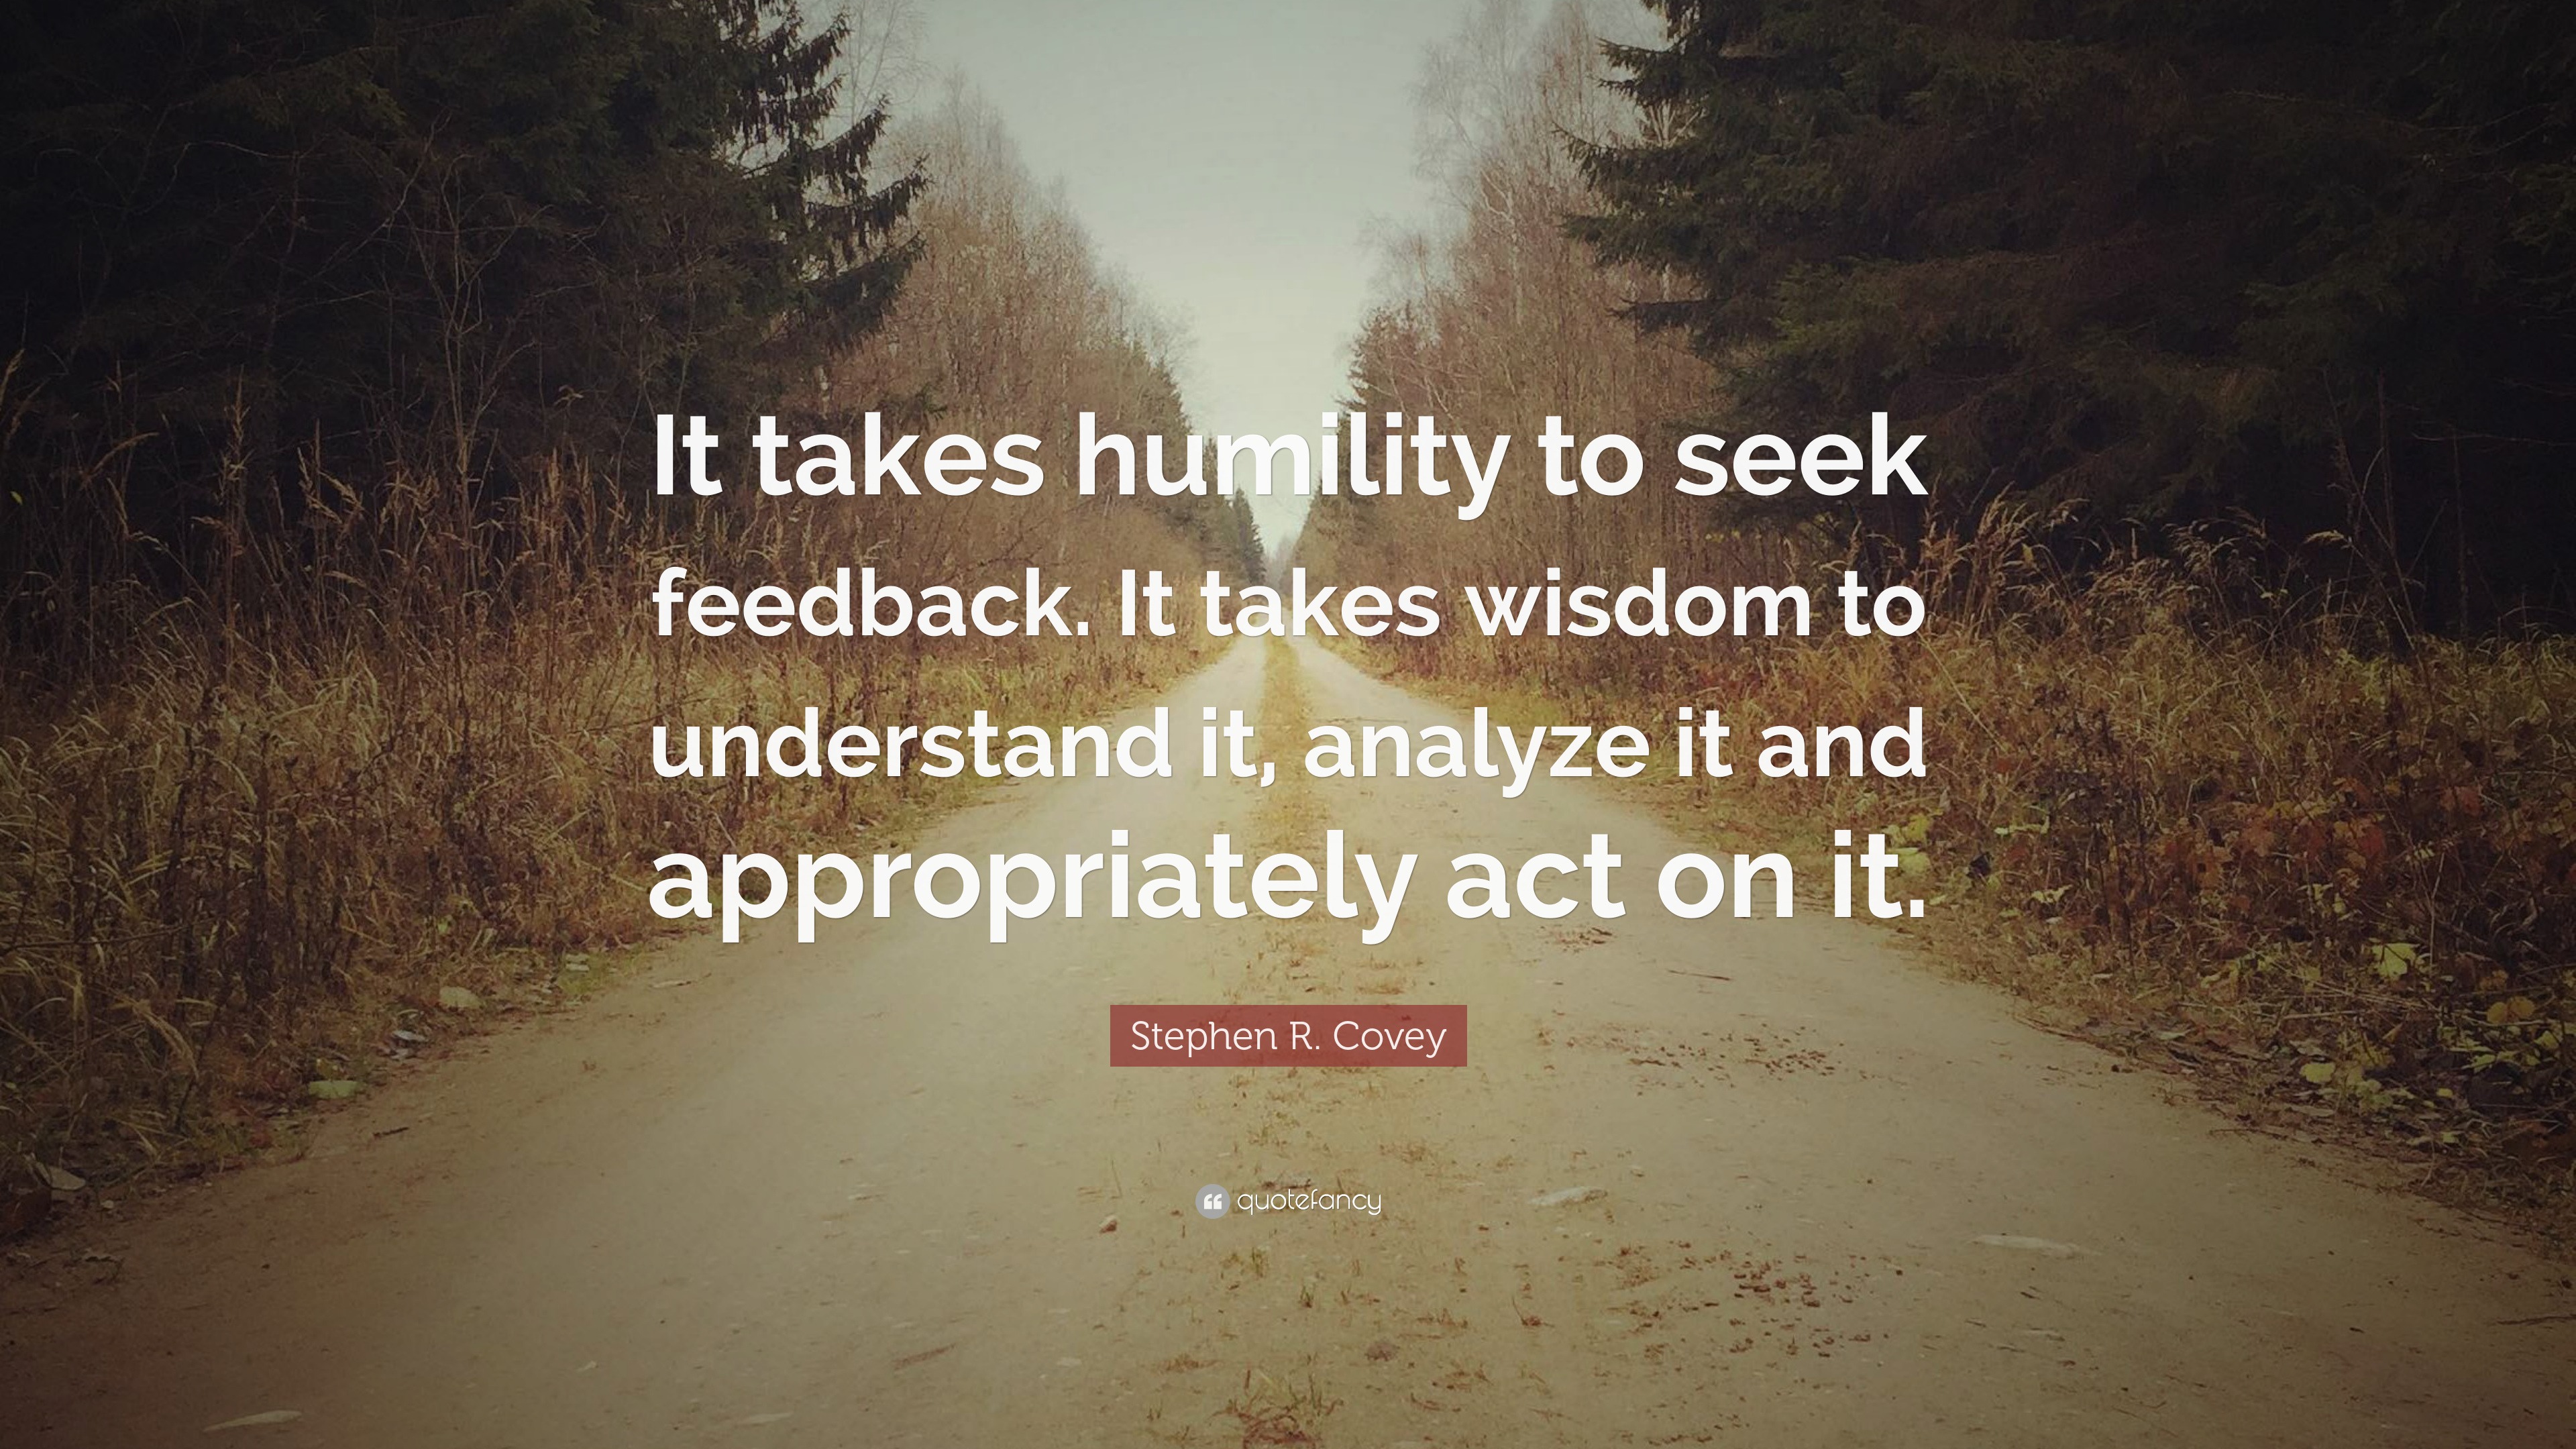 Stephen R. Covey Quote: “It takes humility to seek ...